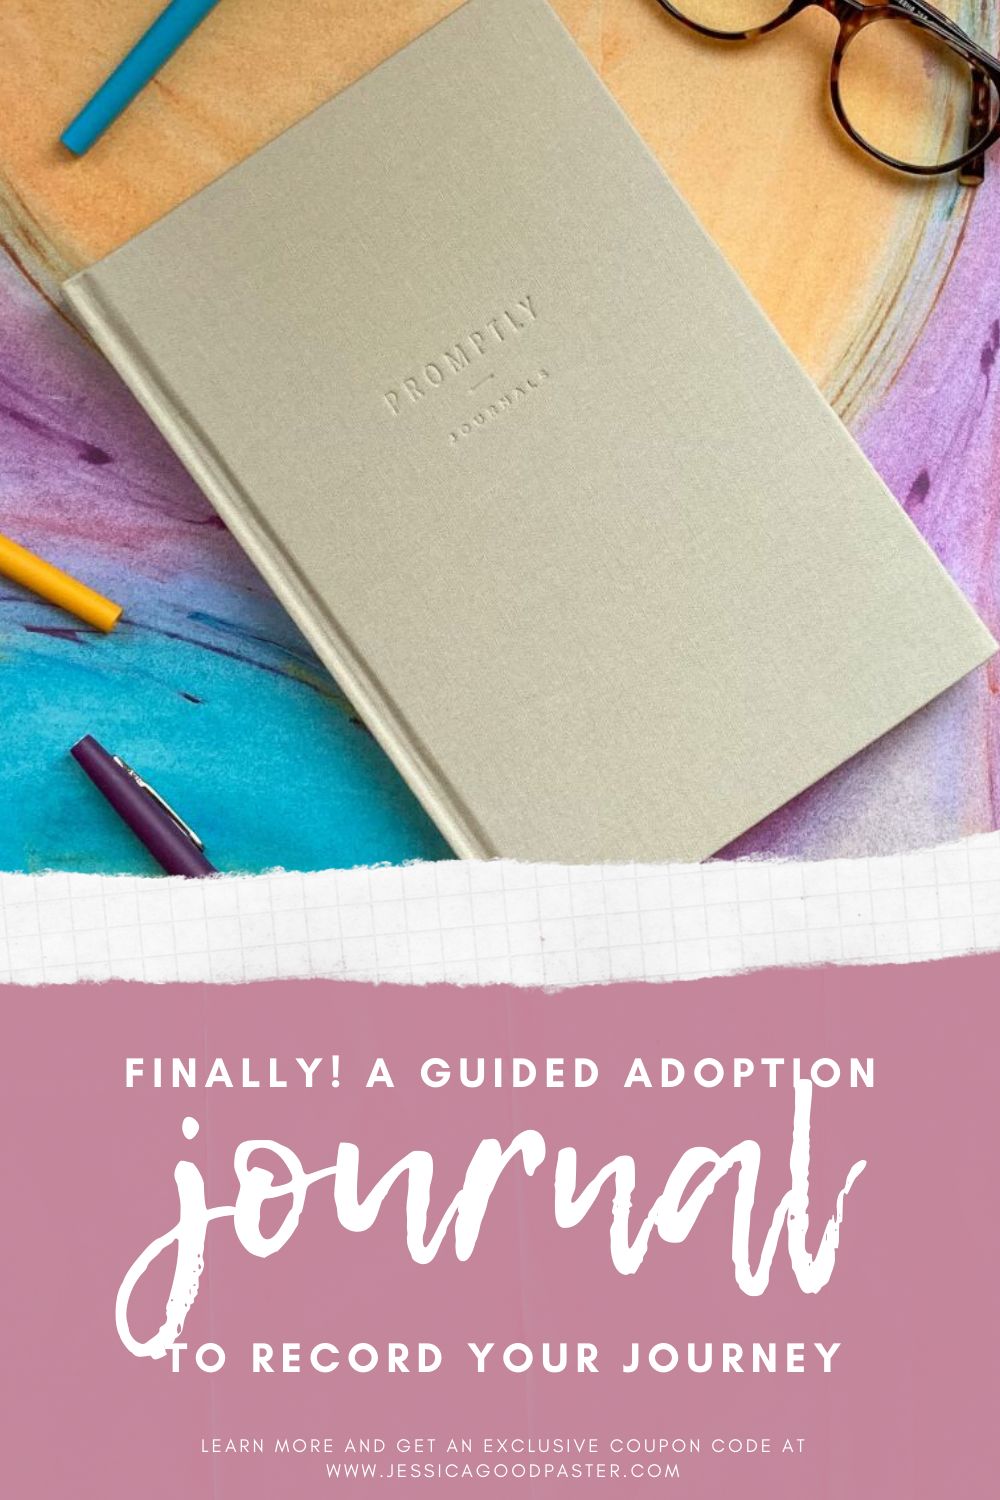 Journal prompts make documenting, connecting, and healing so much easier. Promptly Journals provide journaling ideas with beautiful childhood, adoption, relationship, autobiography, travel, and missionary journals…and more! Their two-person journals foster inspiration and connection. Check out my review today! #journaling #journals #journalprompts #journalideas #journalinspiration